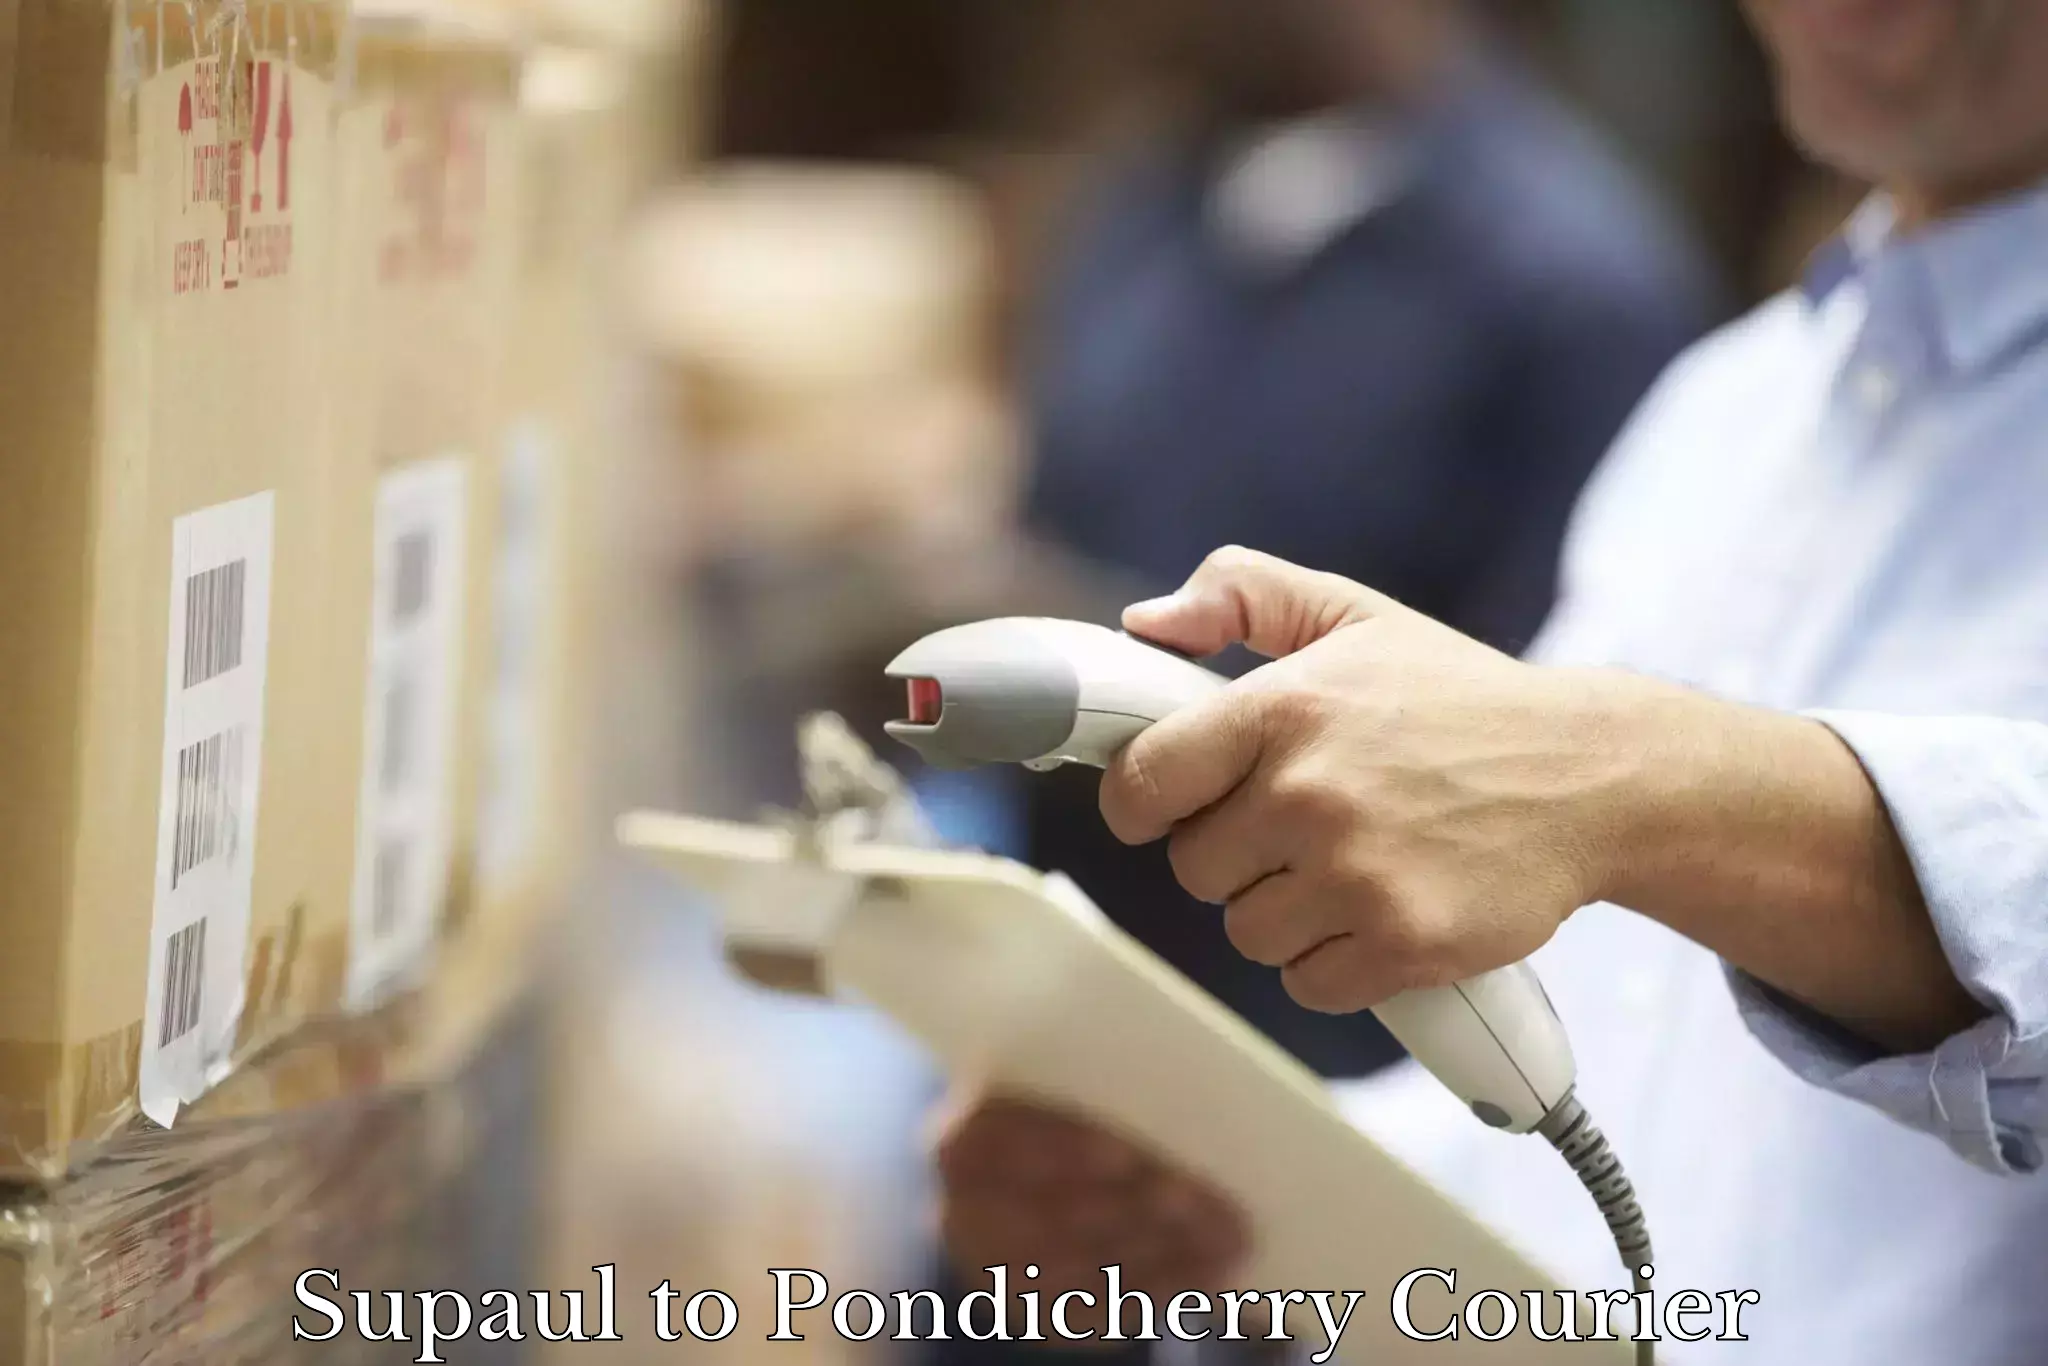 Automated parcel services Supaul to Pondicherry